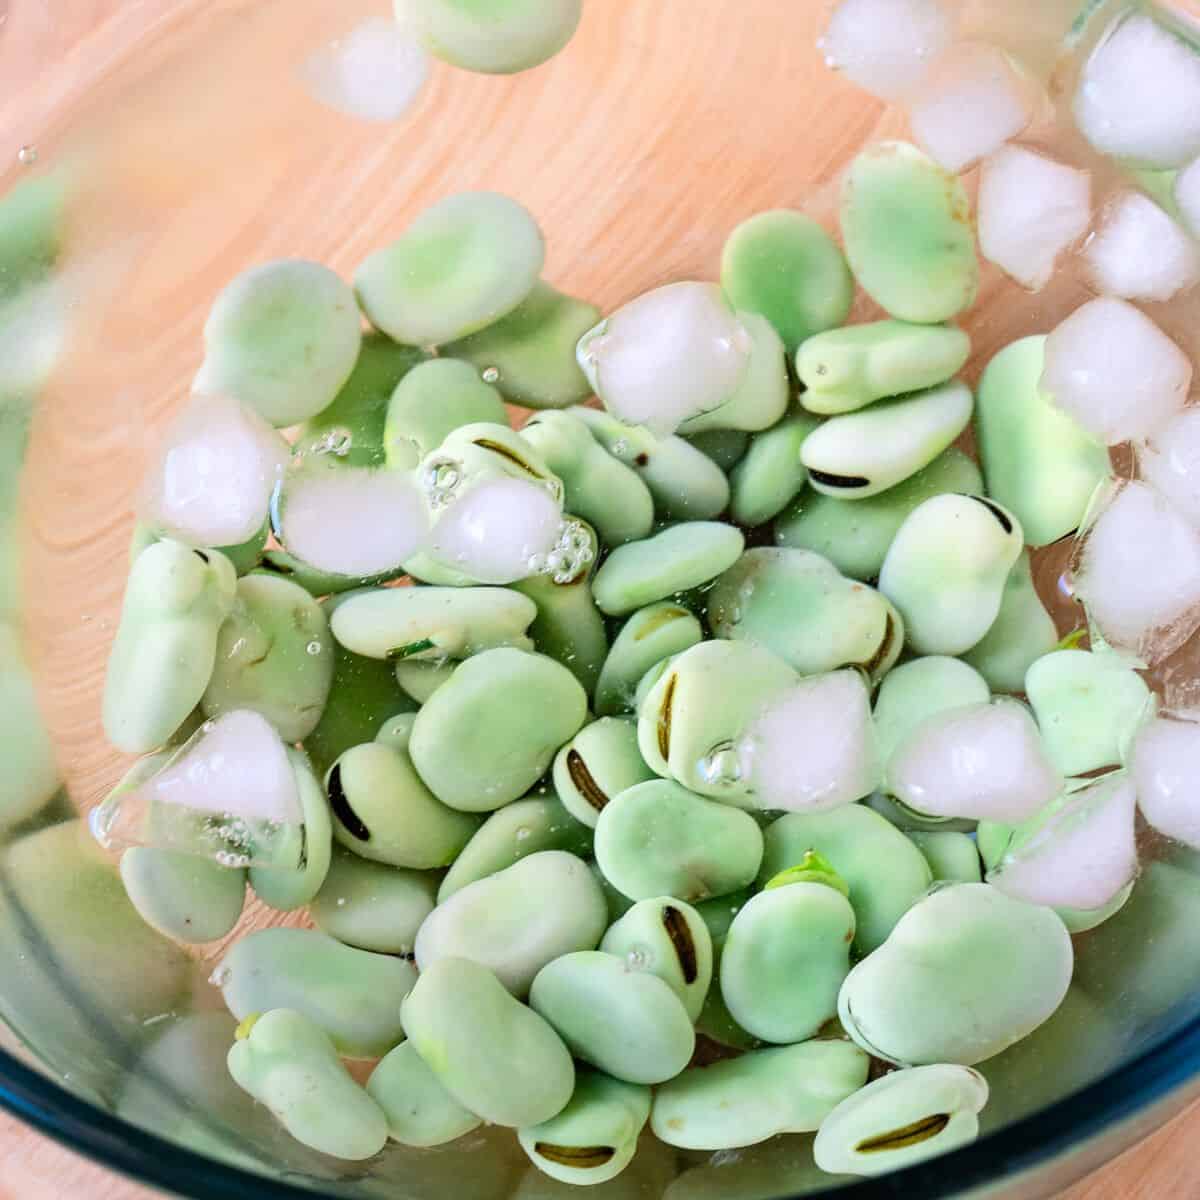 Fava beans in a bowl with ice water.